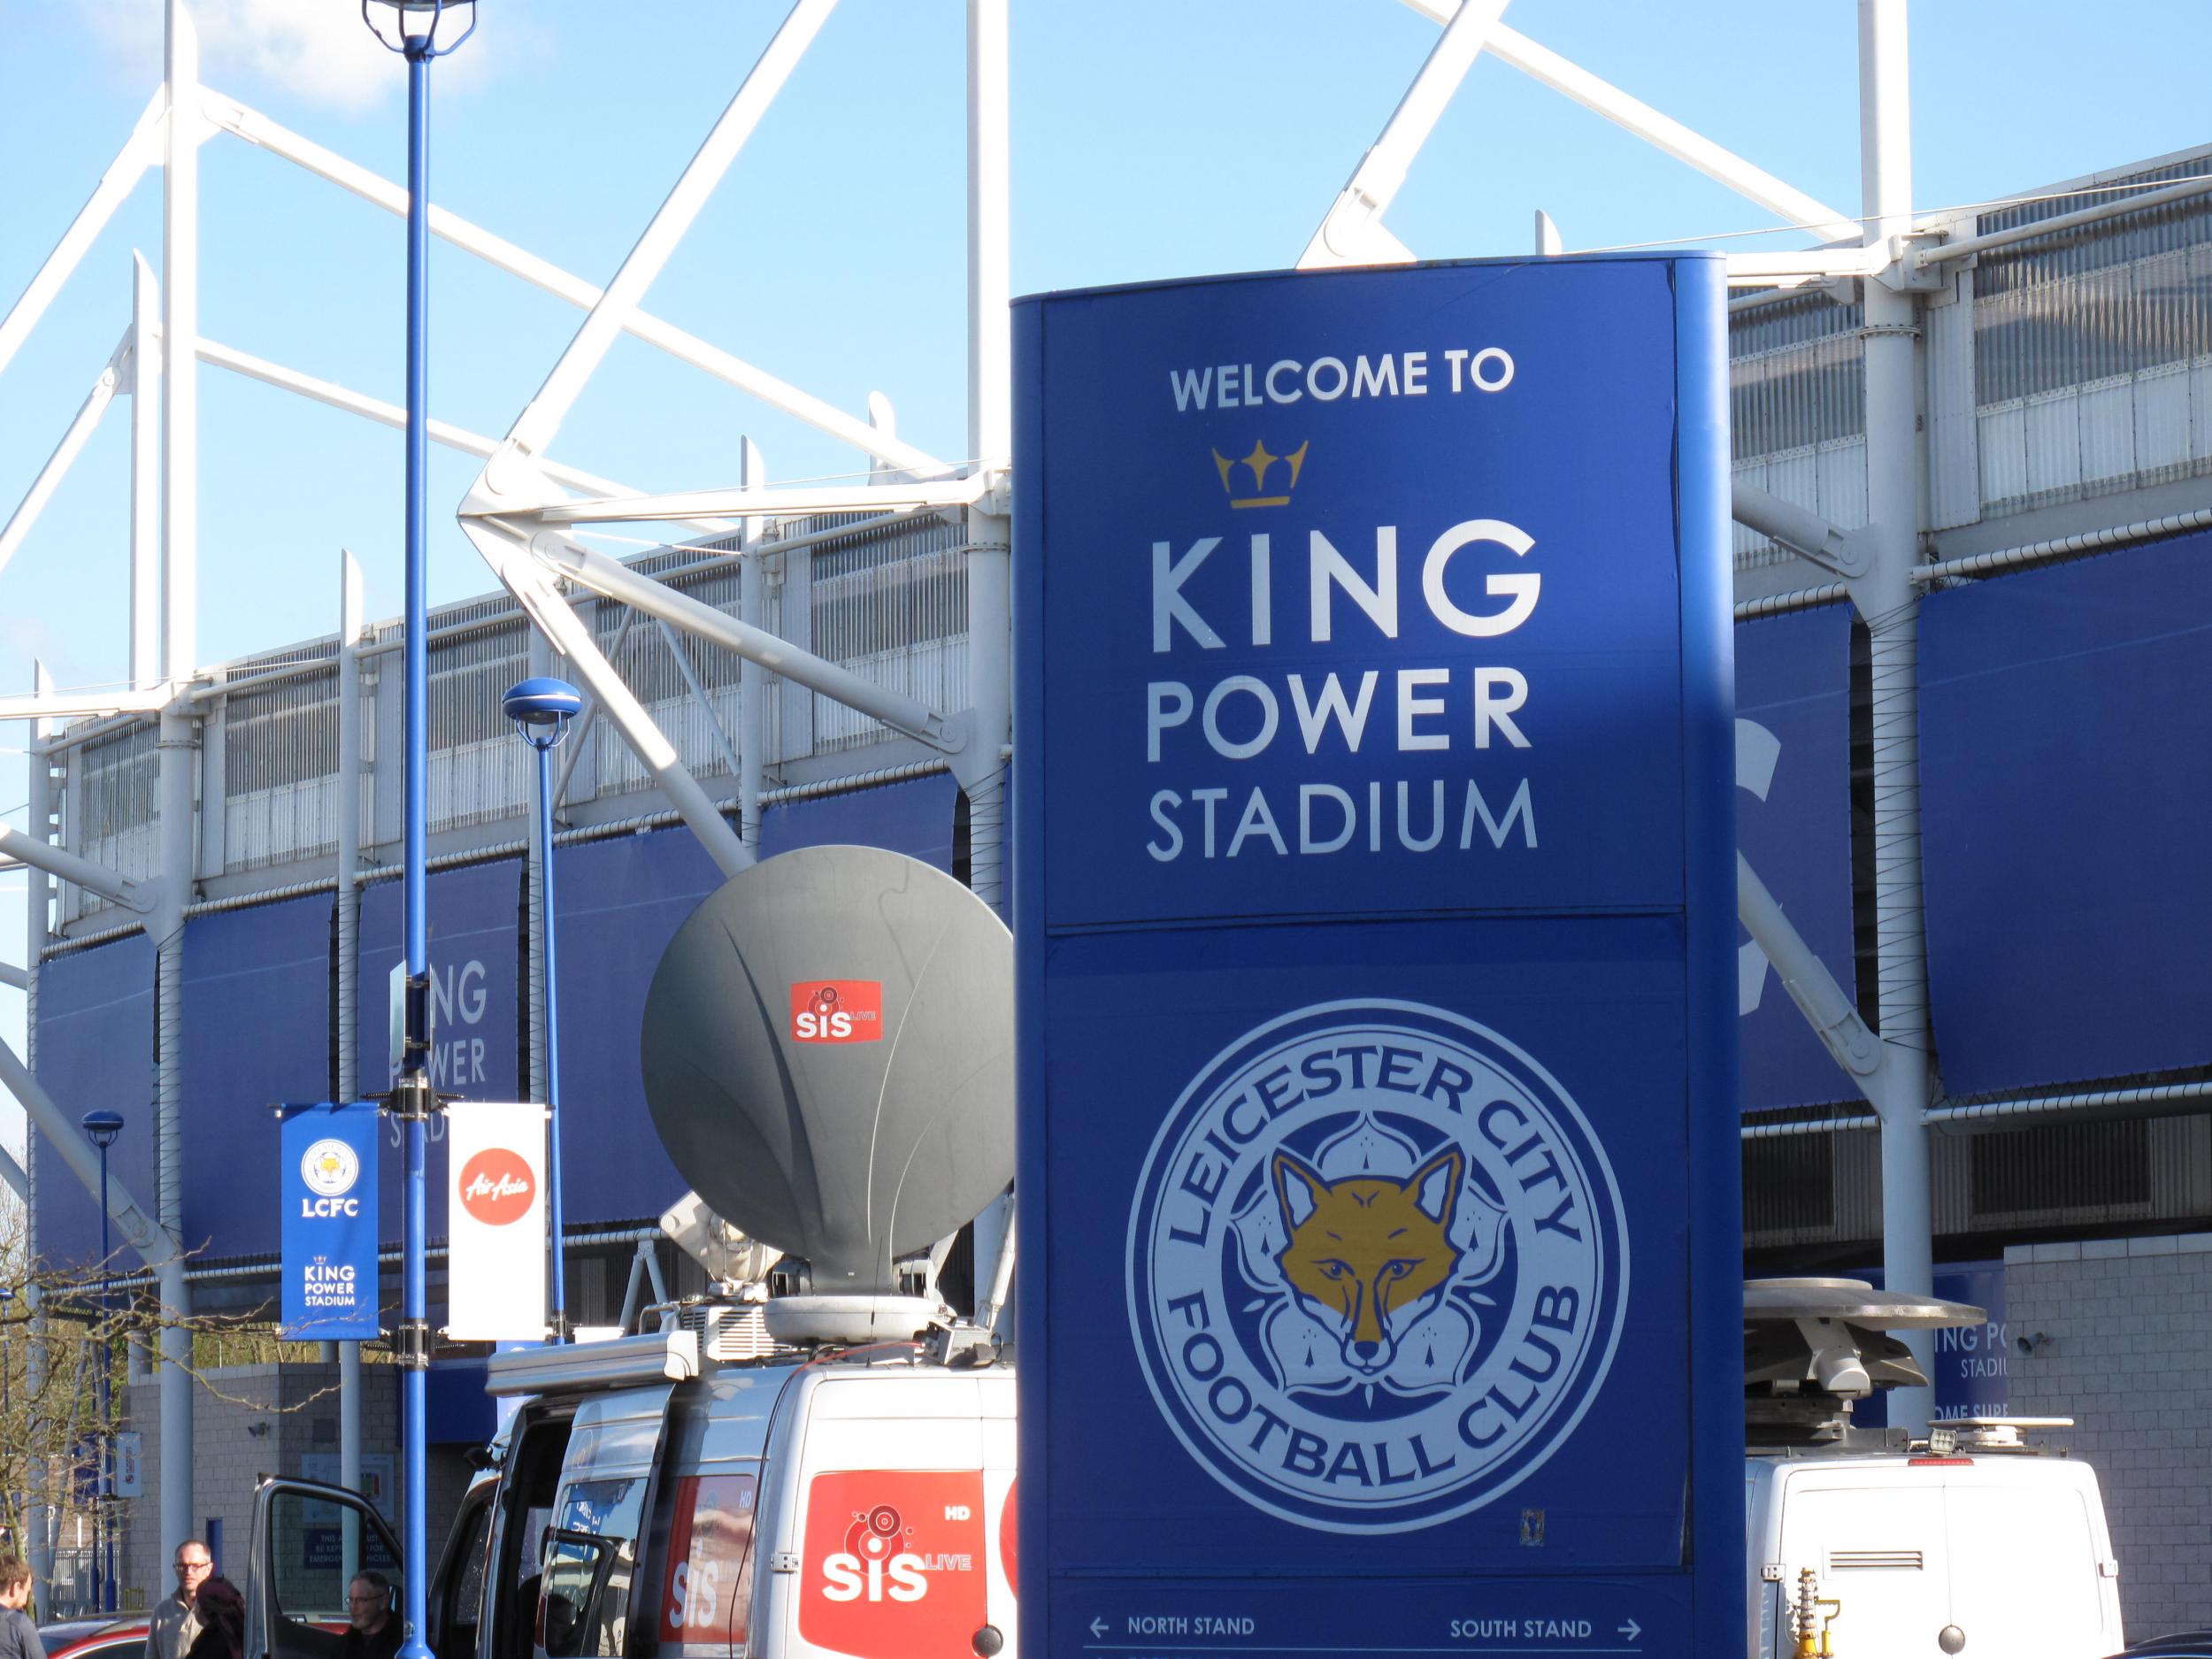 A satellite truck transmits the spirit of Leicester to the world